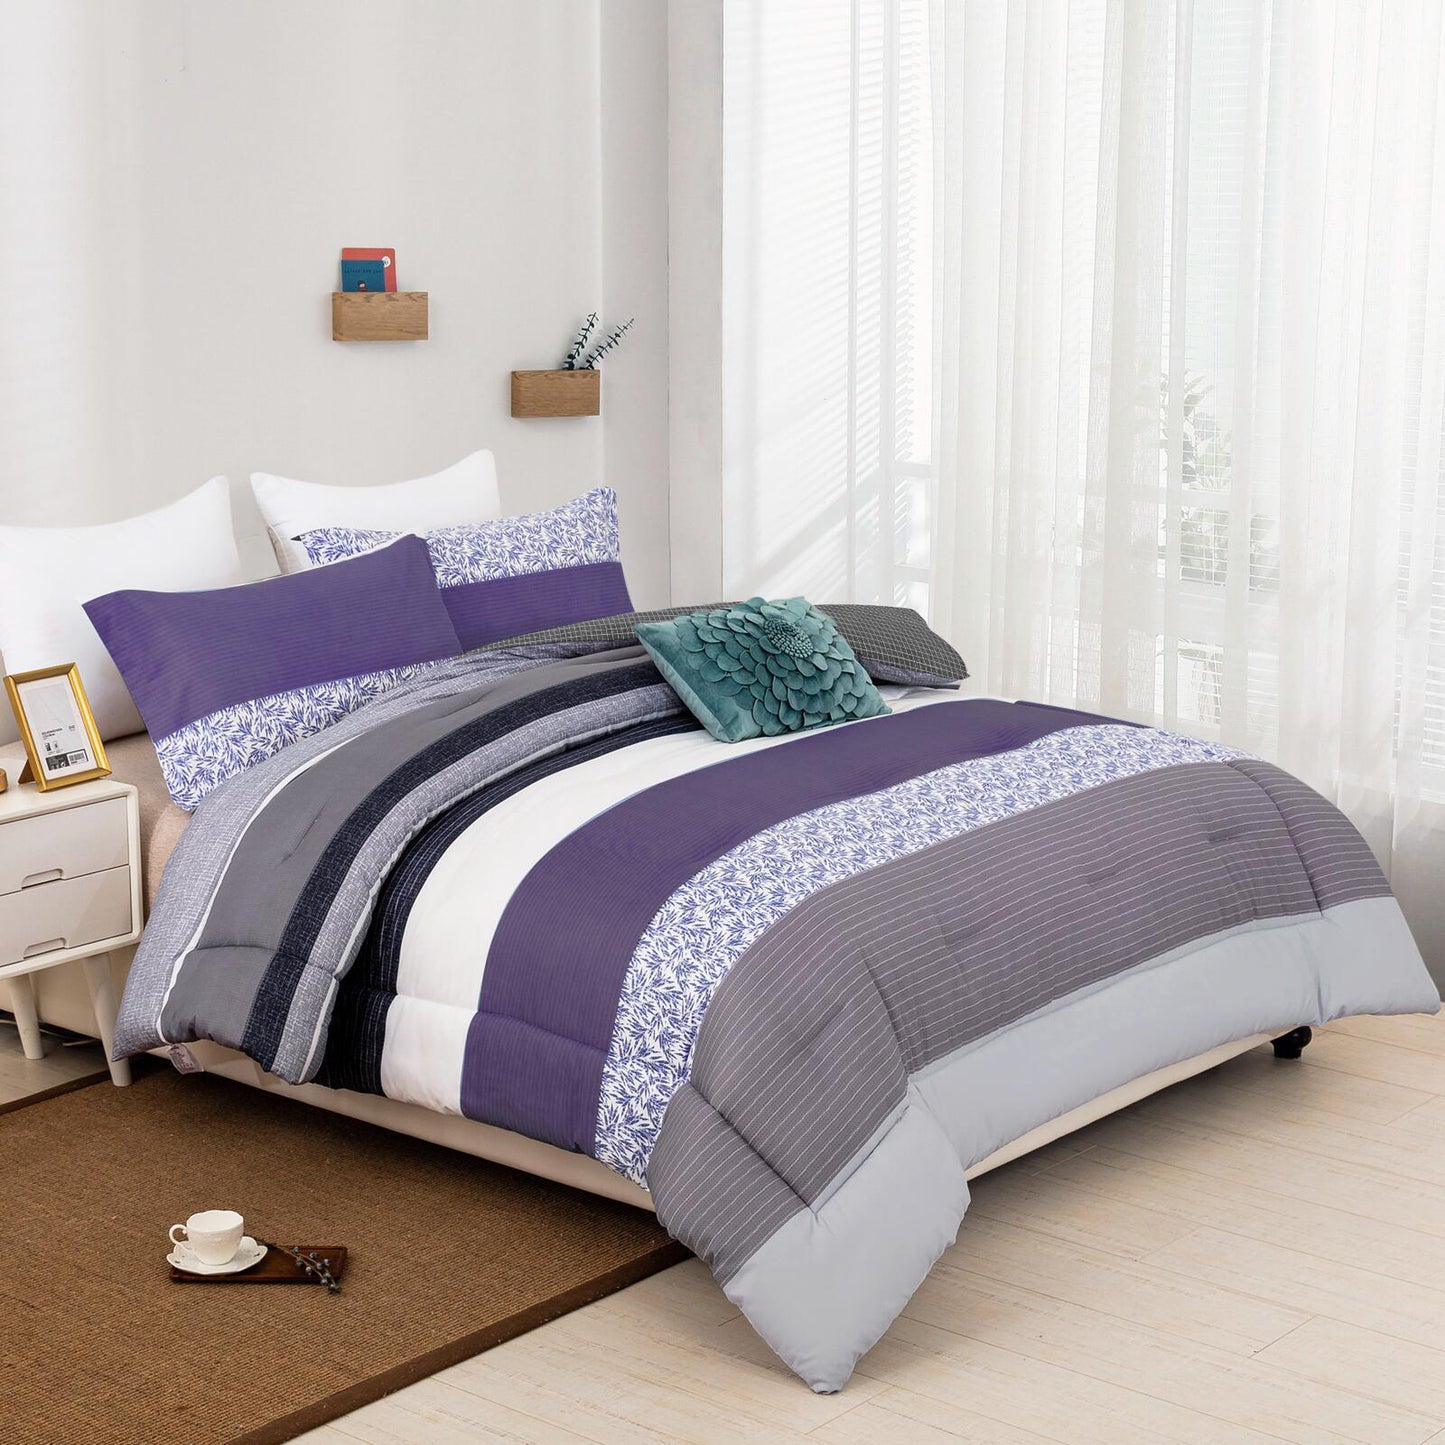 WONGS BEDDING High-End Comforter set with 2 Pillow Cases